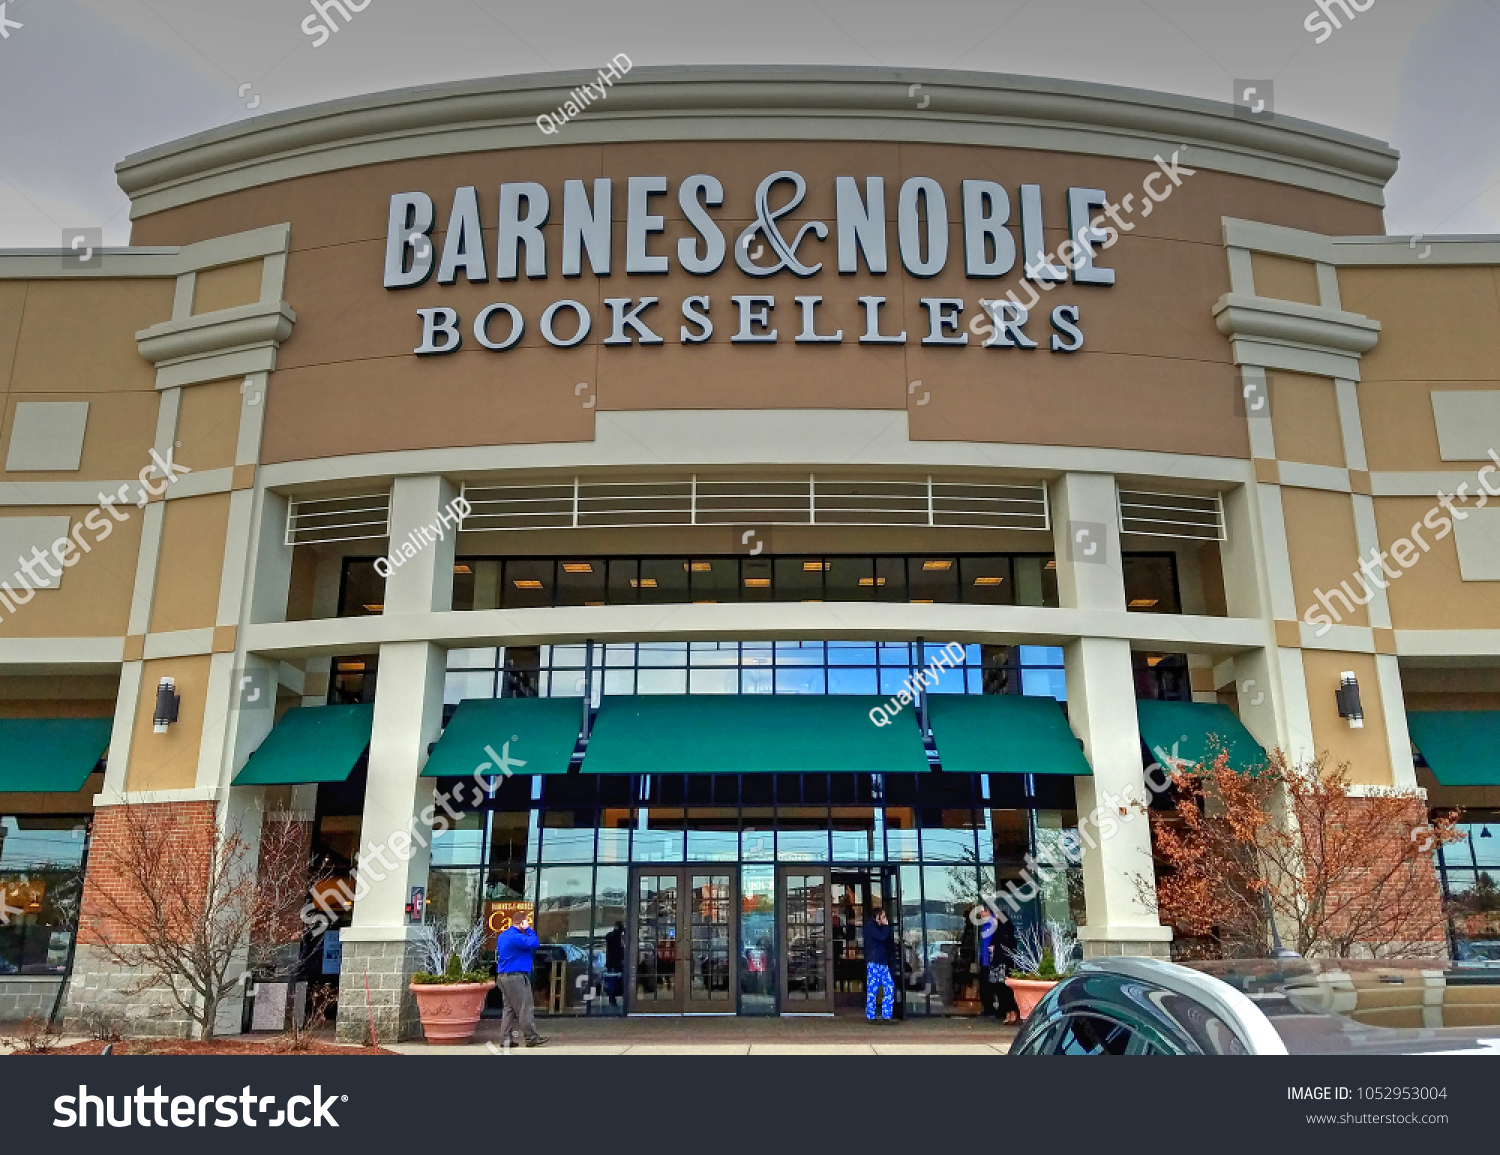 Hdr Image Barnes Noble Retail Bookstore Stock Photo Edit Now 1052953004